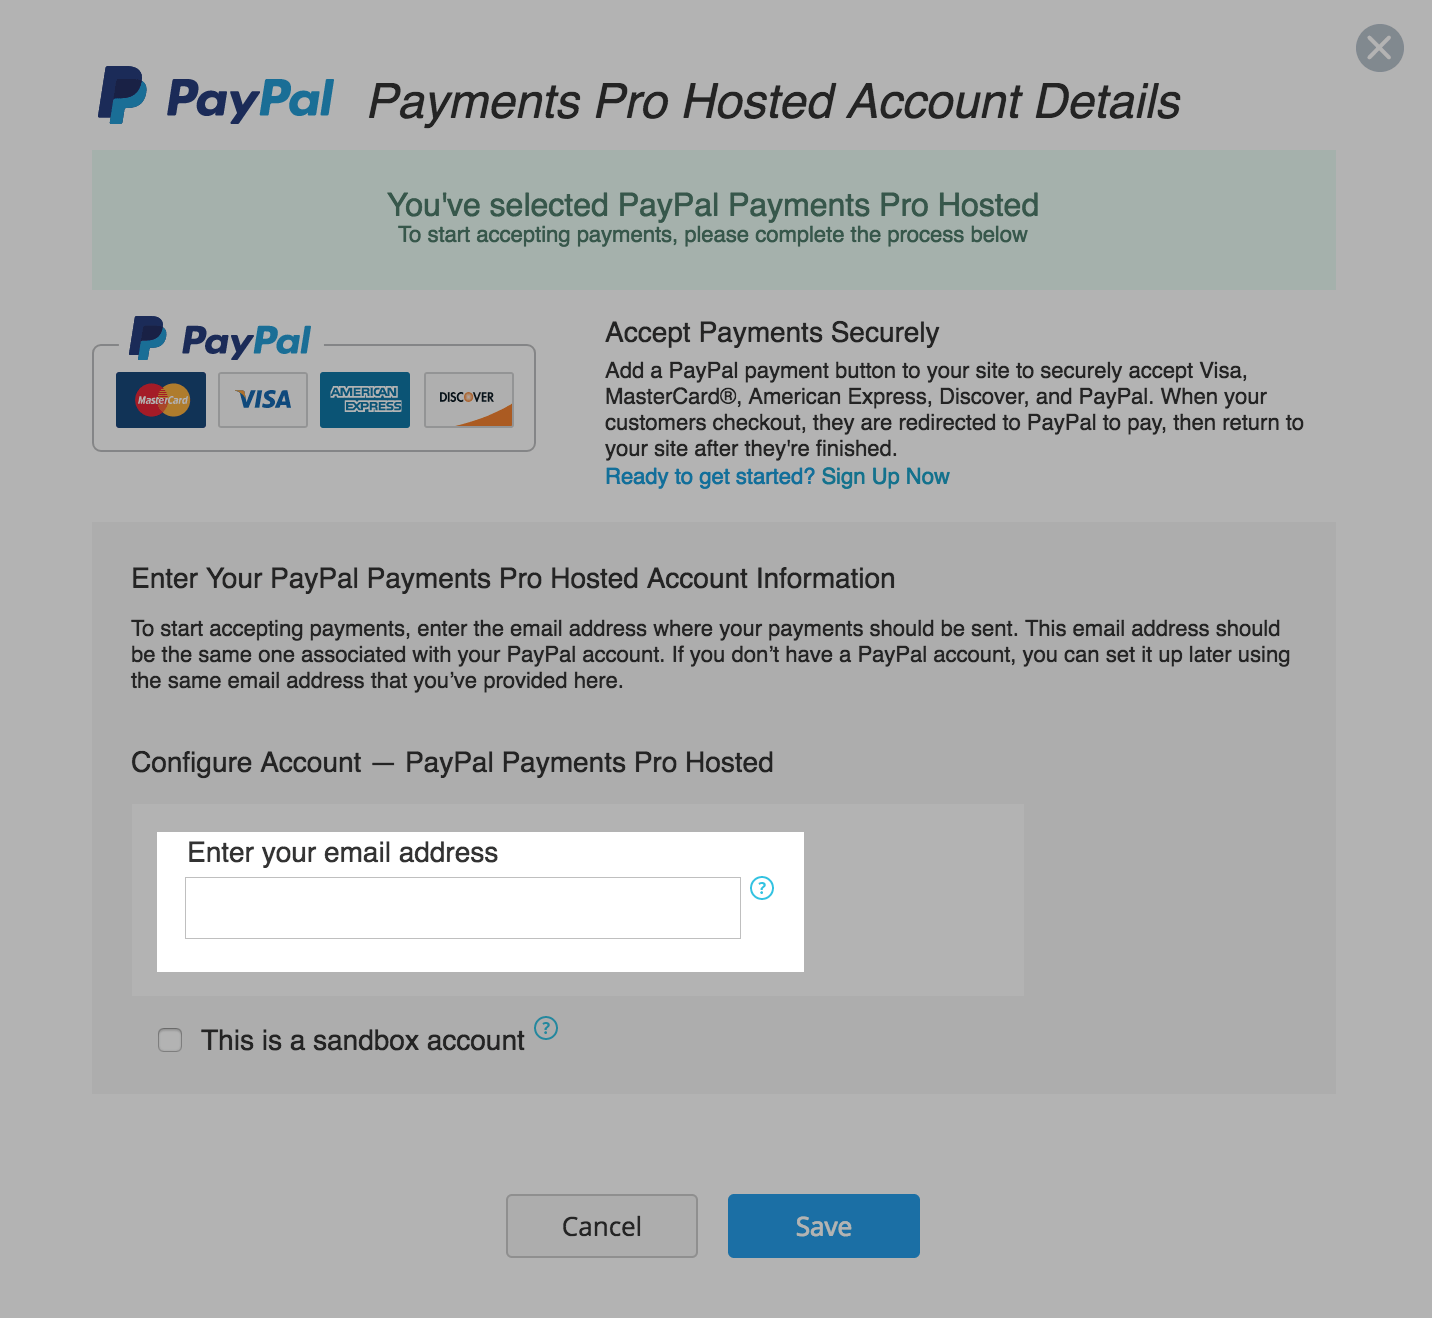 PayPal Pro Hosted